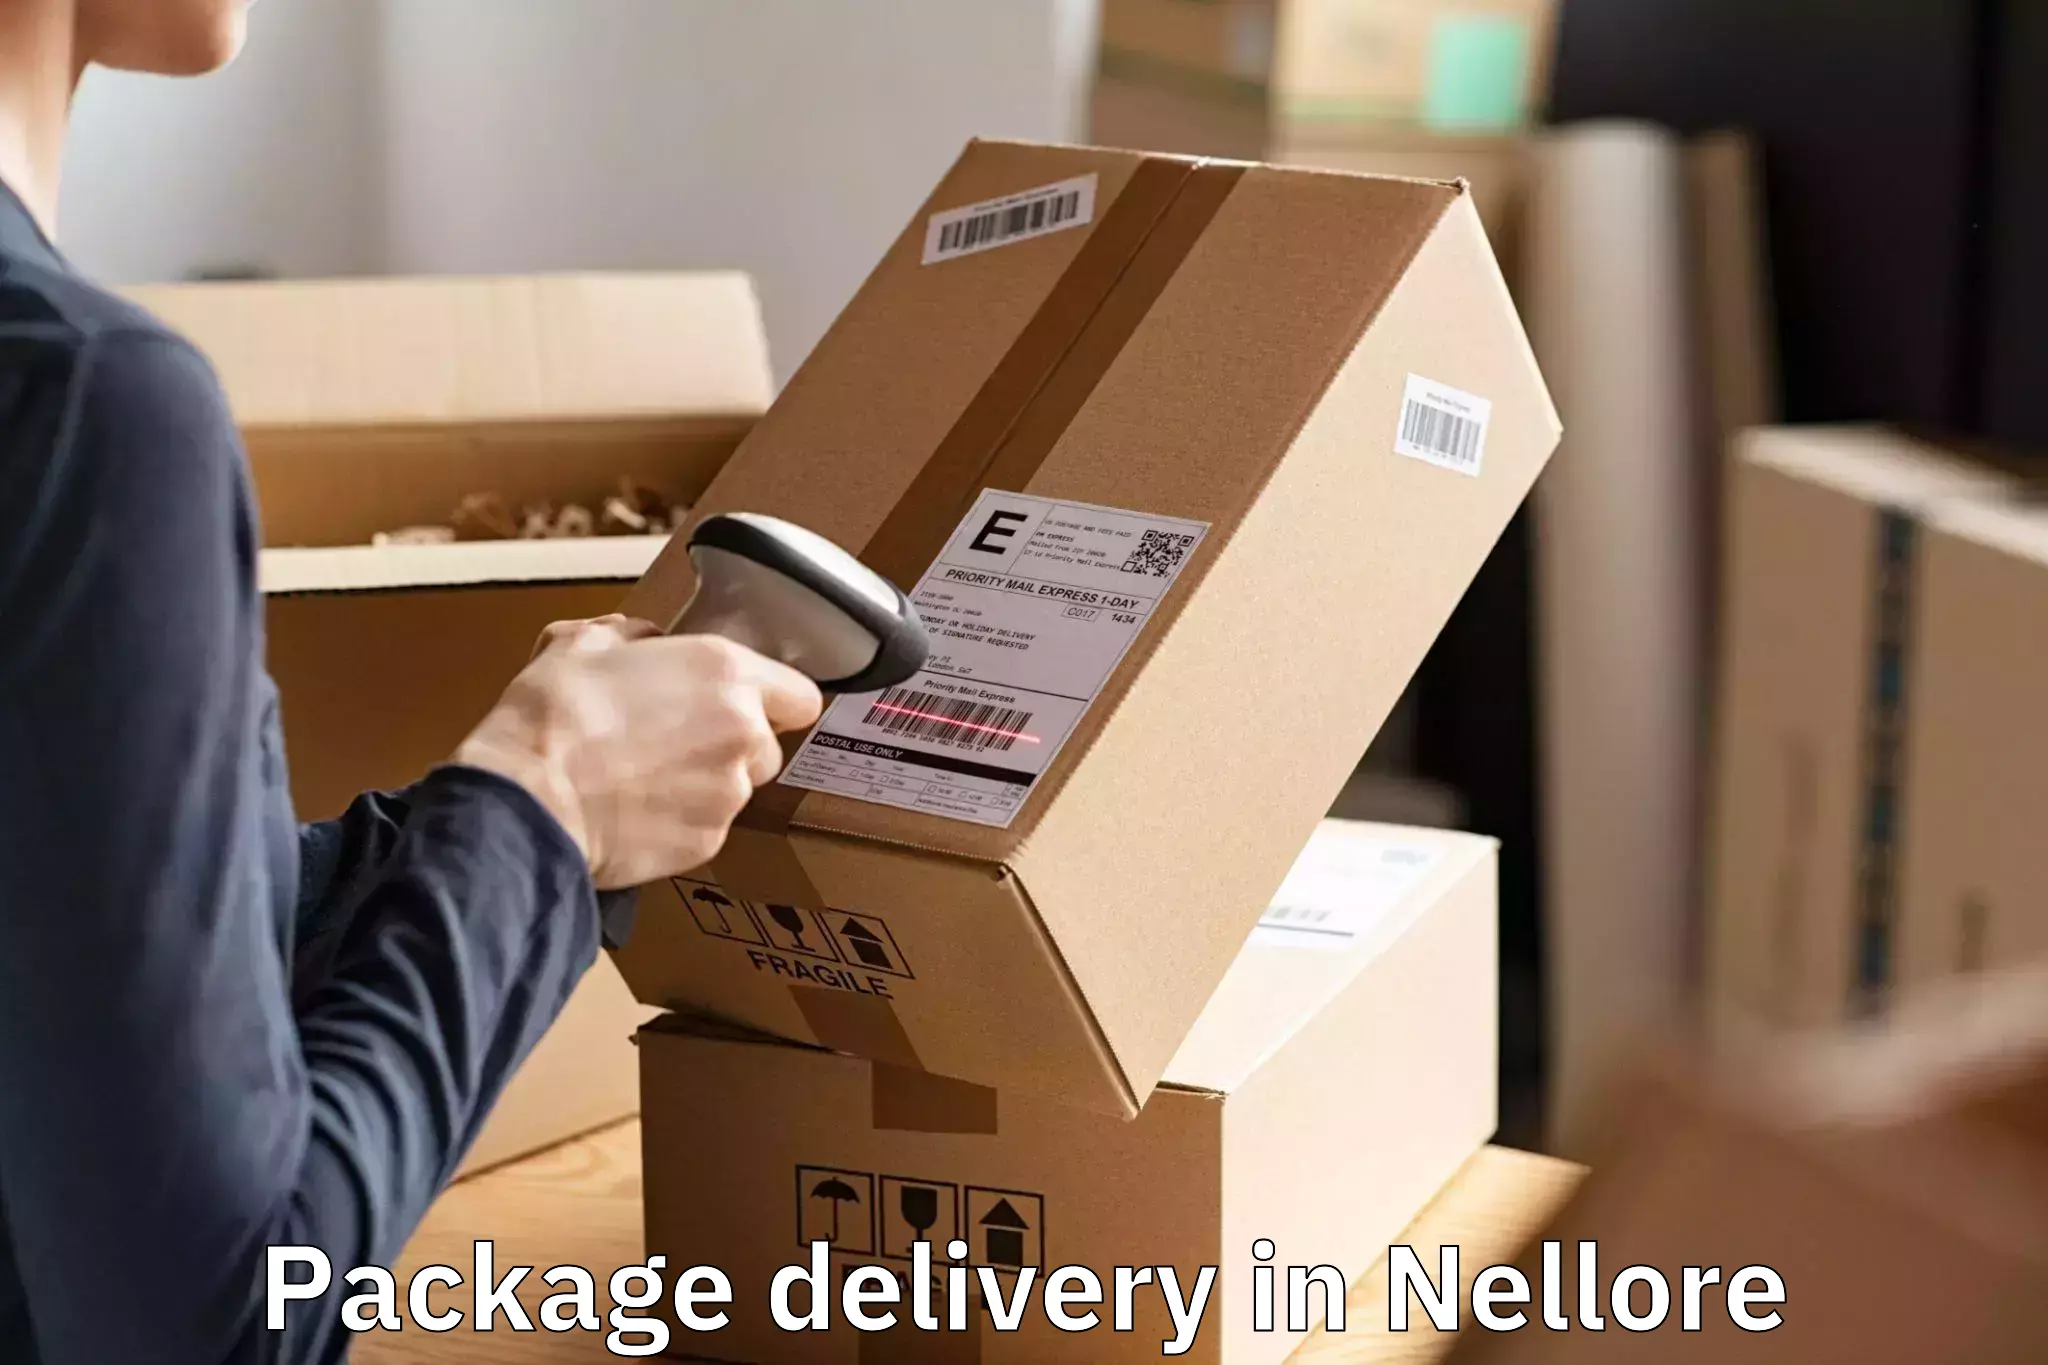 Efficient Package Delivery in Nellore, Andhra Pradesh (AP)